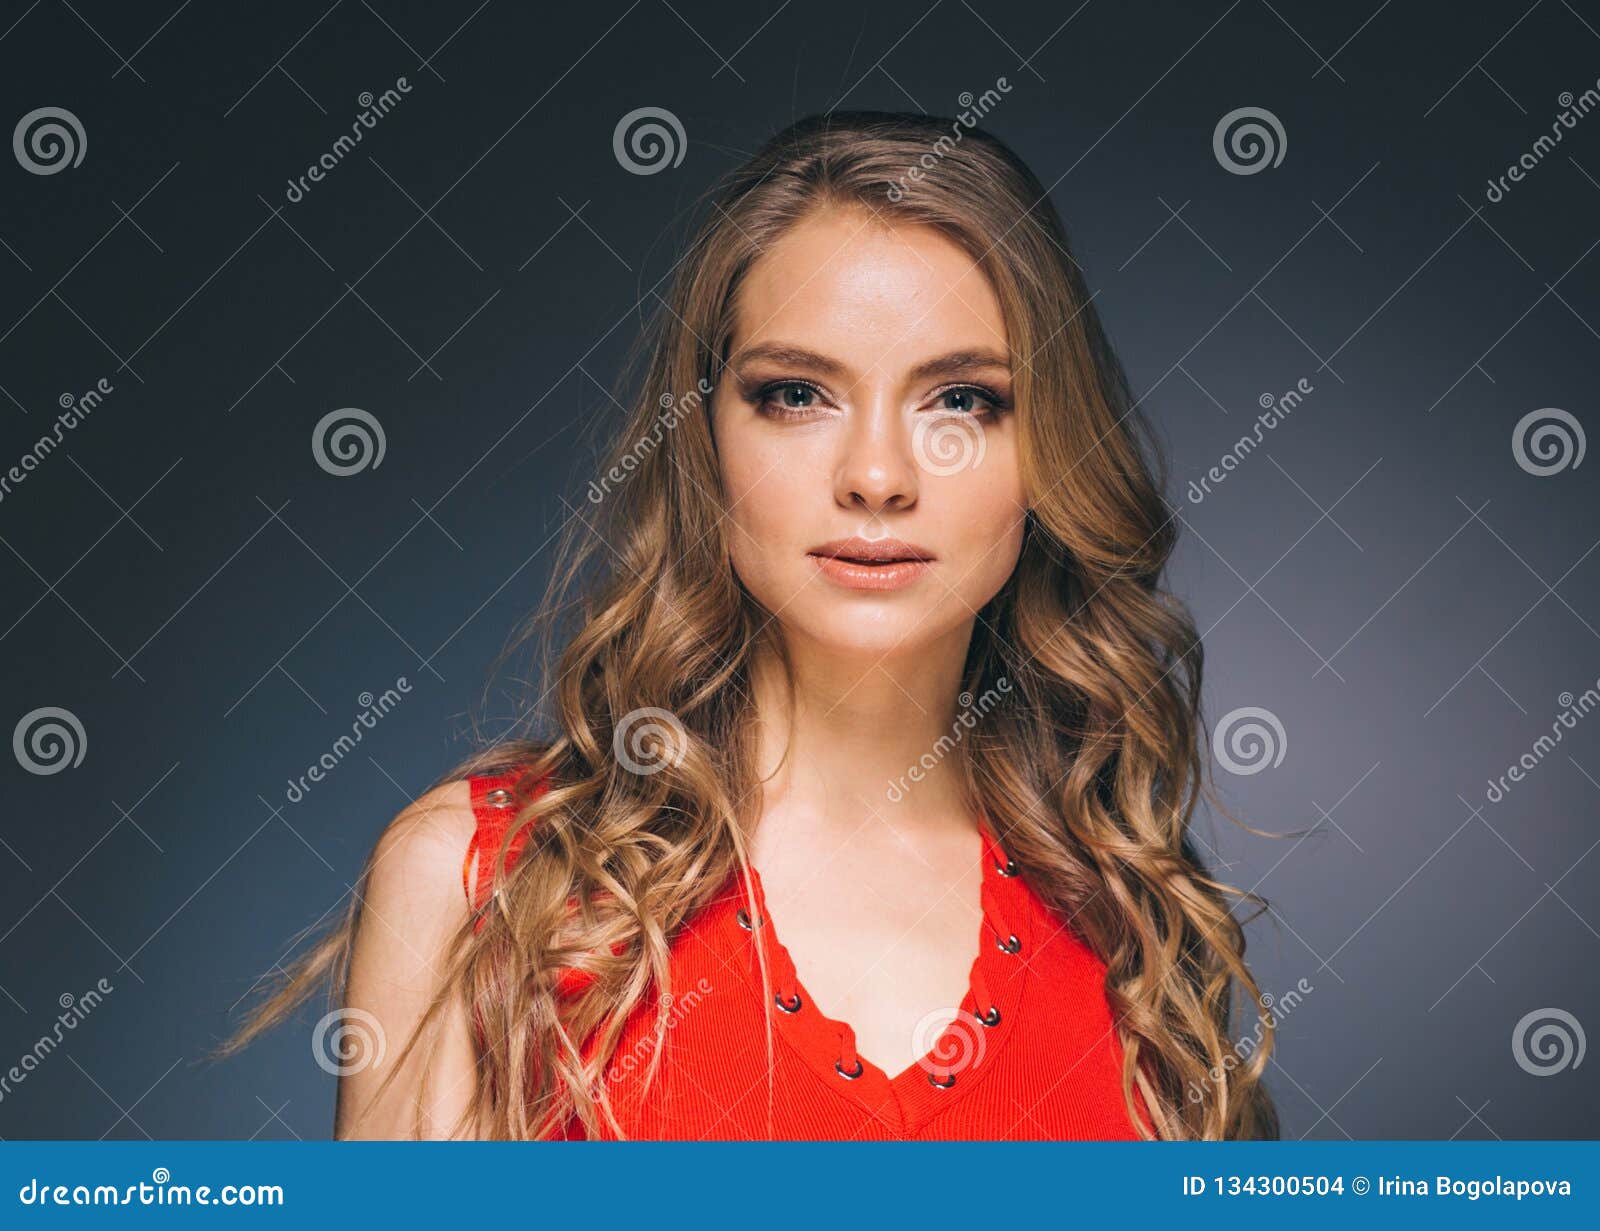 Woman in Red Dress with Long Blonde Hair Stock Photo - Image of dress ...